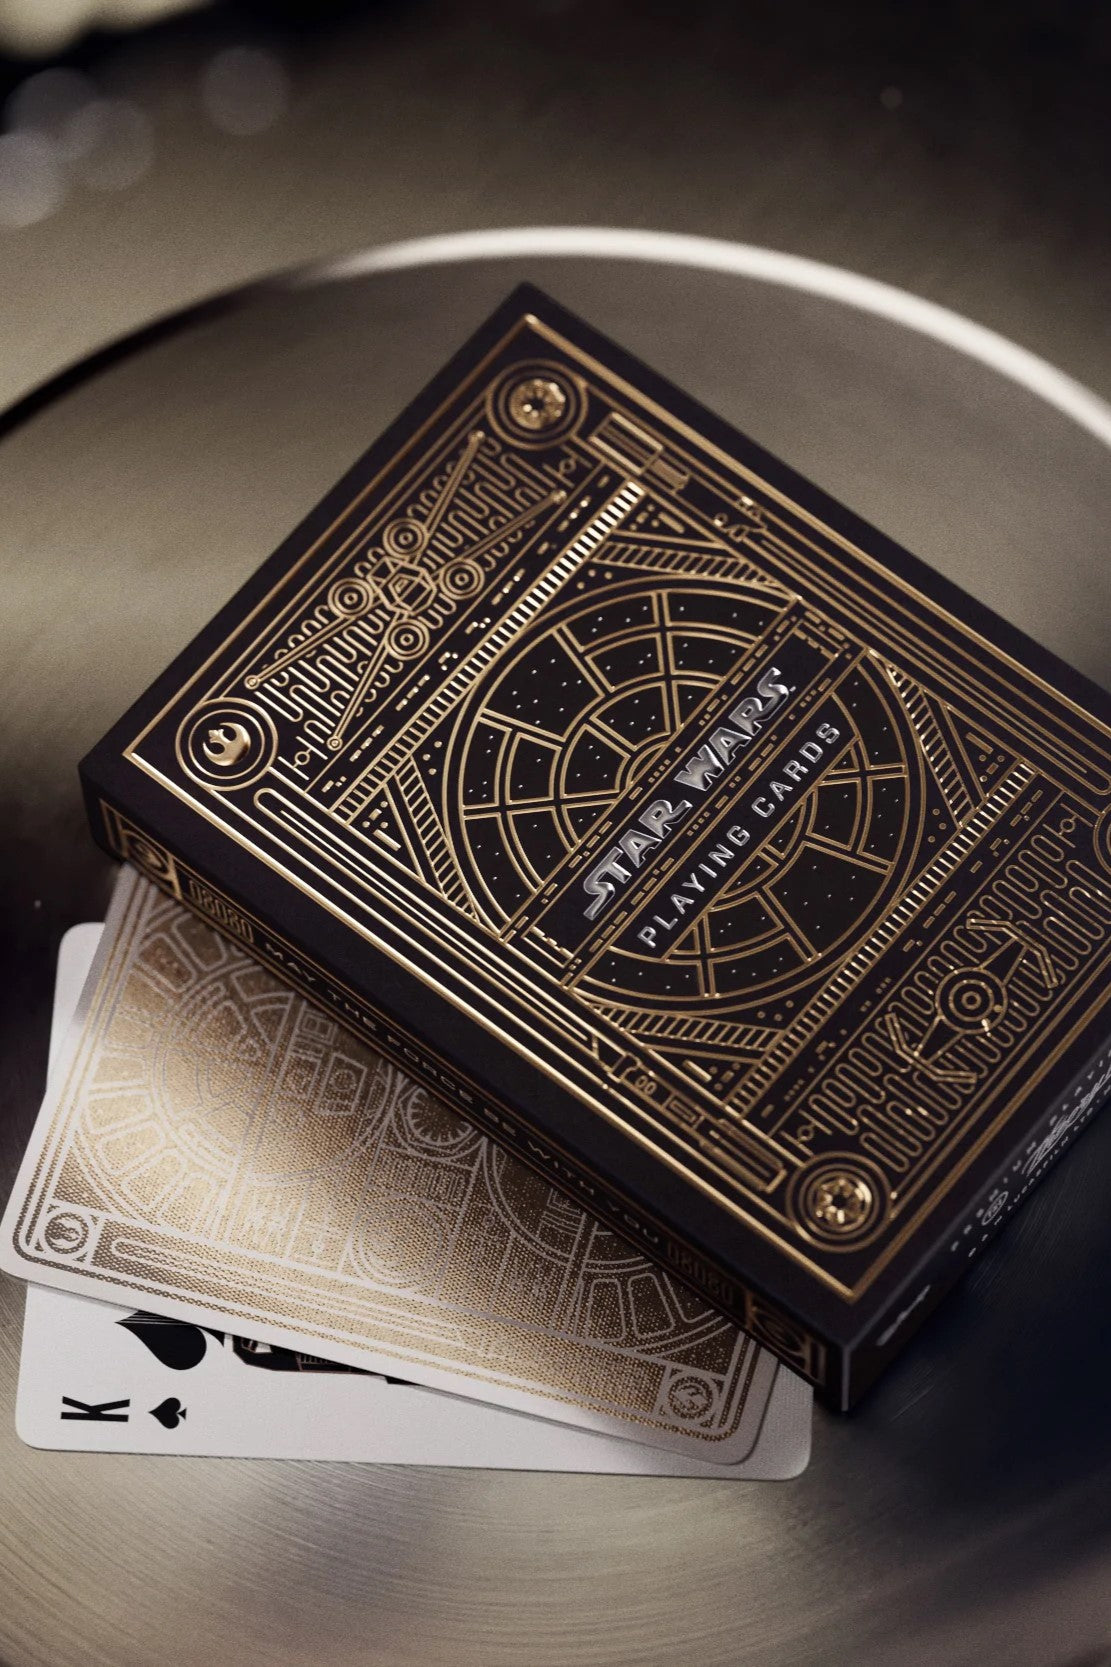 Theory 11 Playing Cards // Star Wars // Gold Edition